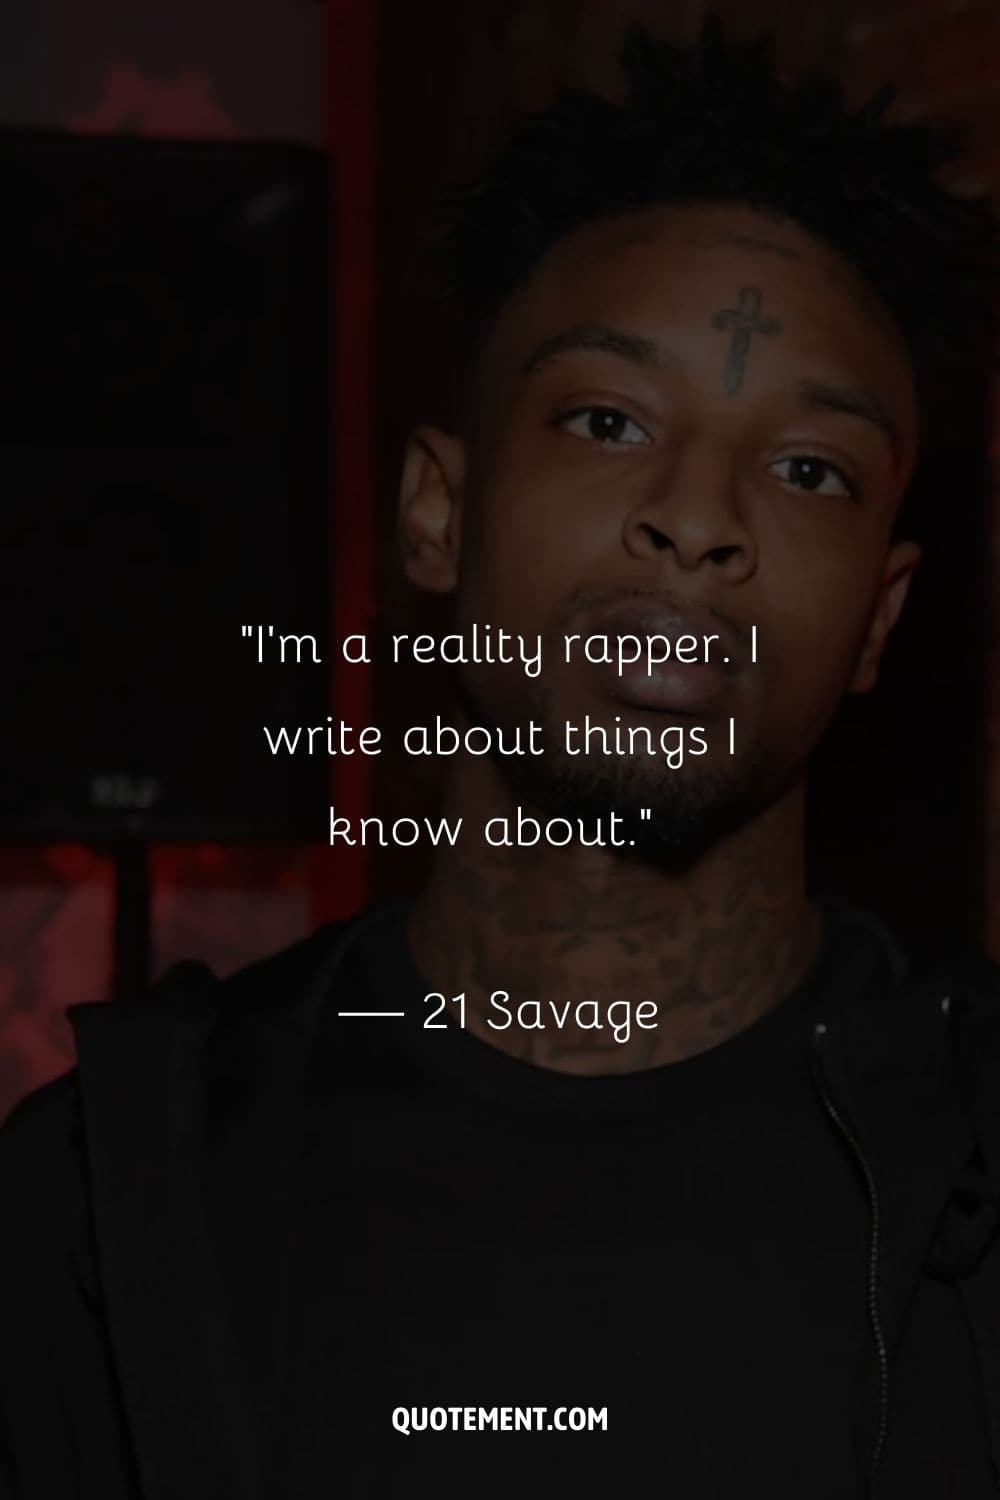 21 Savage A force in hip-hop.